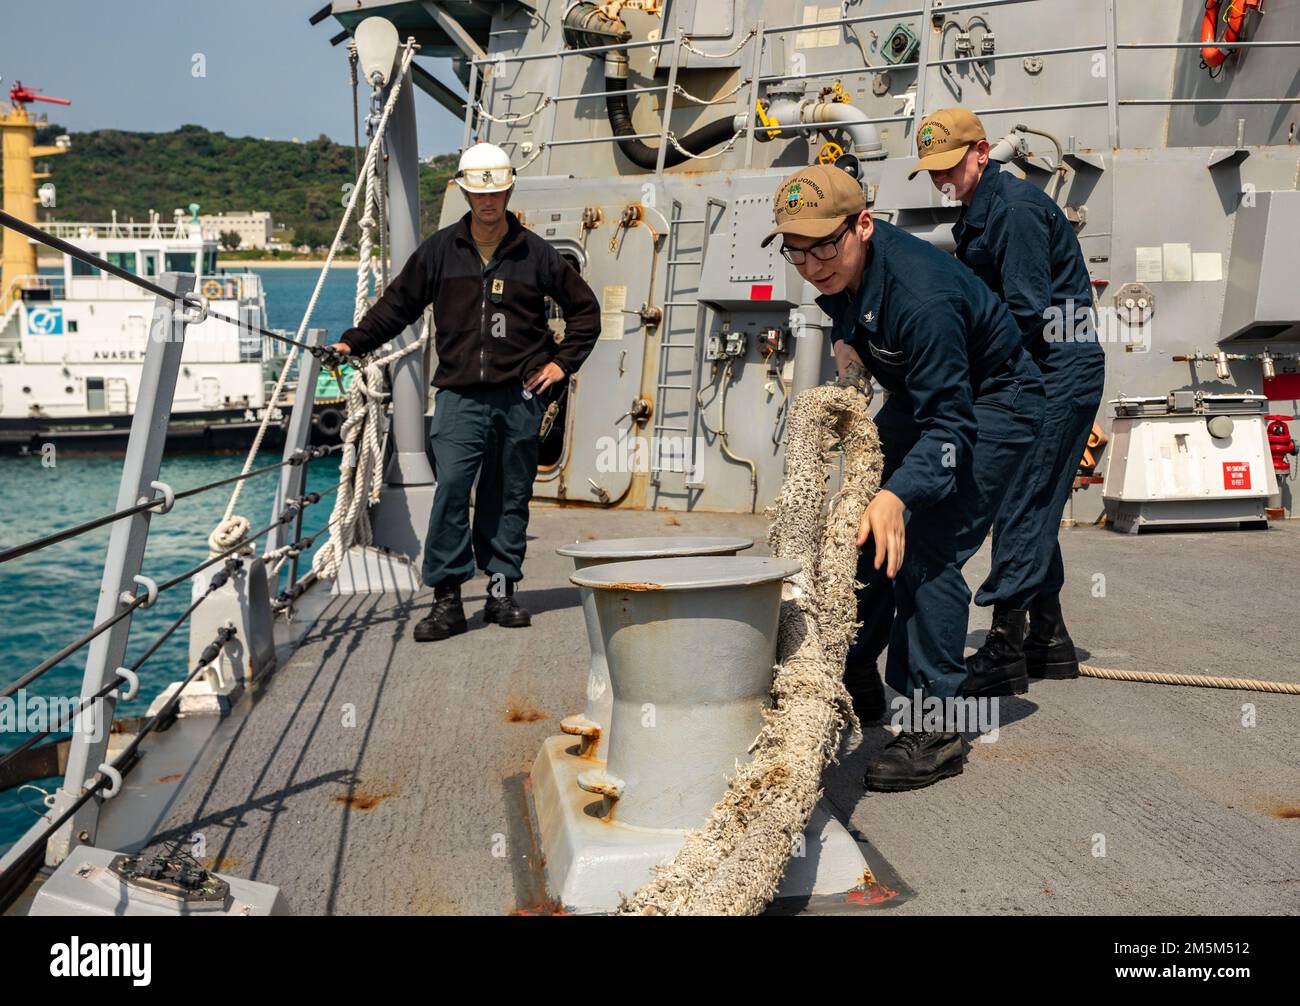 OKINAWA, Japan (March 24, 2022) Sailors aboard Arleigh Burke-class guided-missile destroyer USS Ralph Johnson (DDG 114) heave a line. Ralph Johnson is assigned to Task Force 71/Destroyer Squadron (DESRON) 15, the Navy’s largest forward-deployed DESRON and the U.S. 7th fleet’s principal surface force. Stock Photo